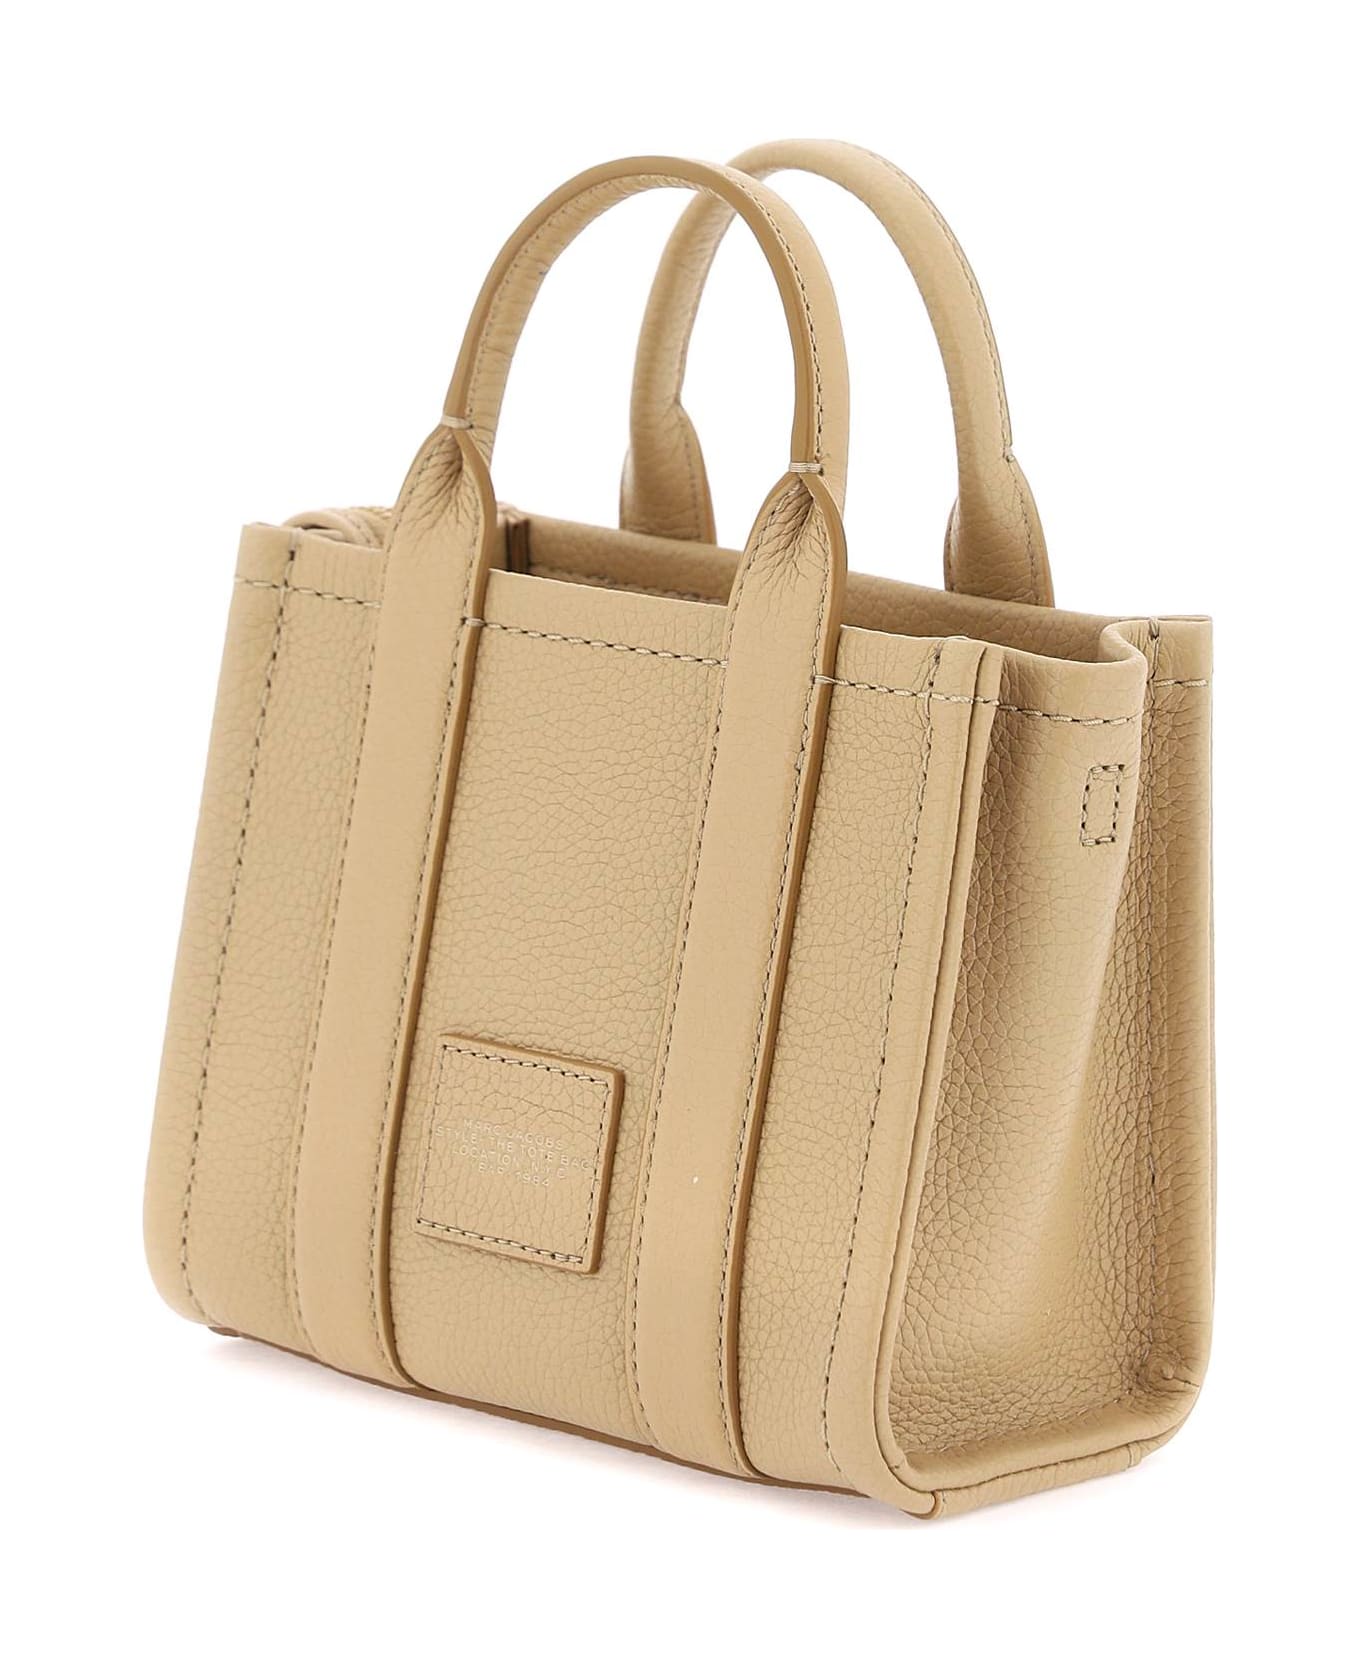 Marc Jacobs The Leather Mini Tote Bag - CAMEL (Beige)